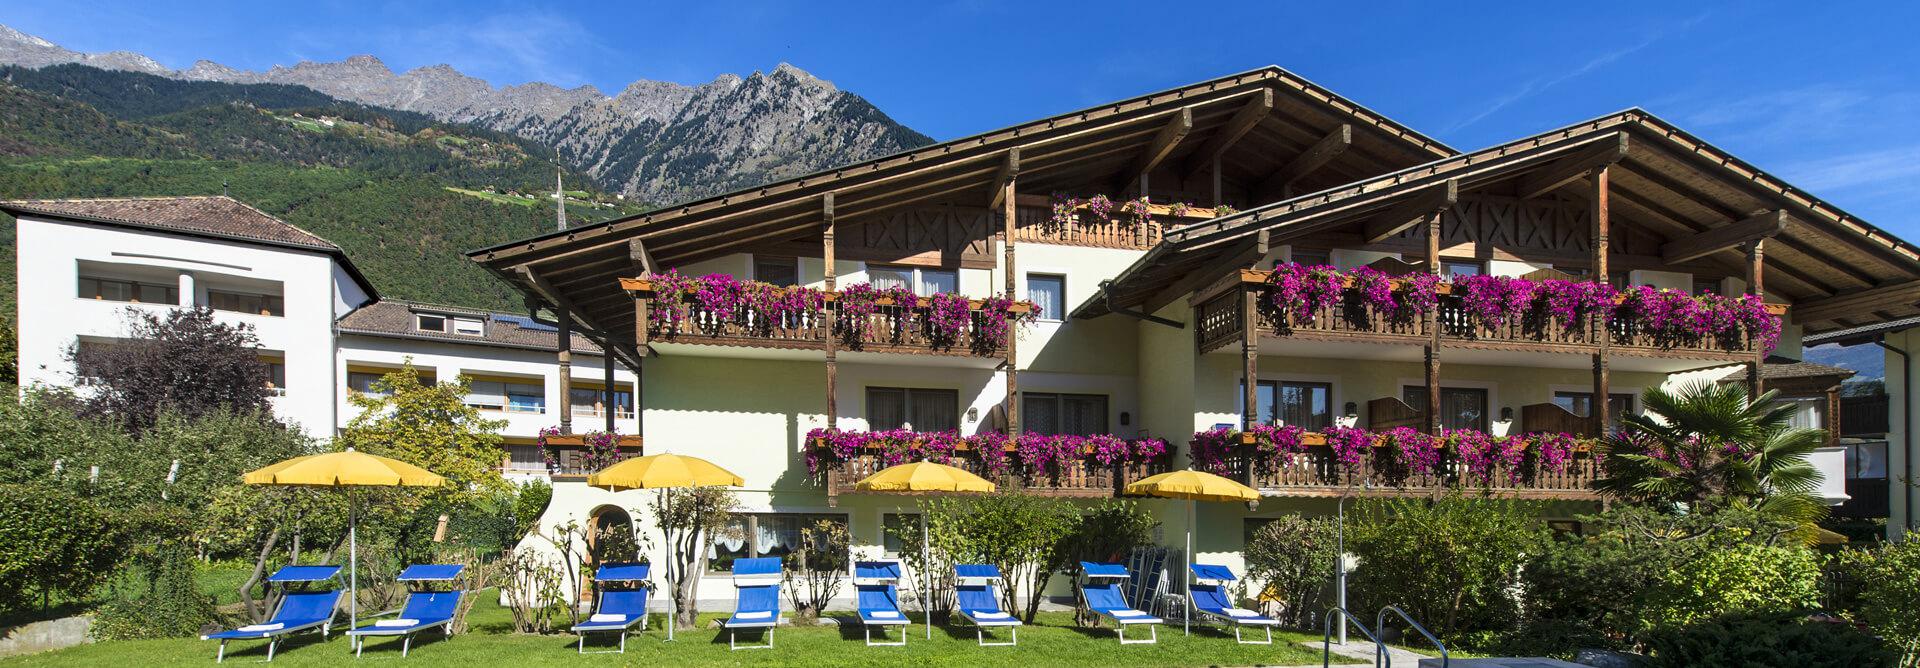 A holiday in Merano and Environs: nature, culture and adventure